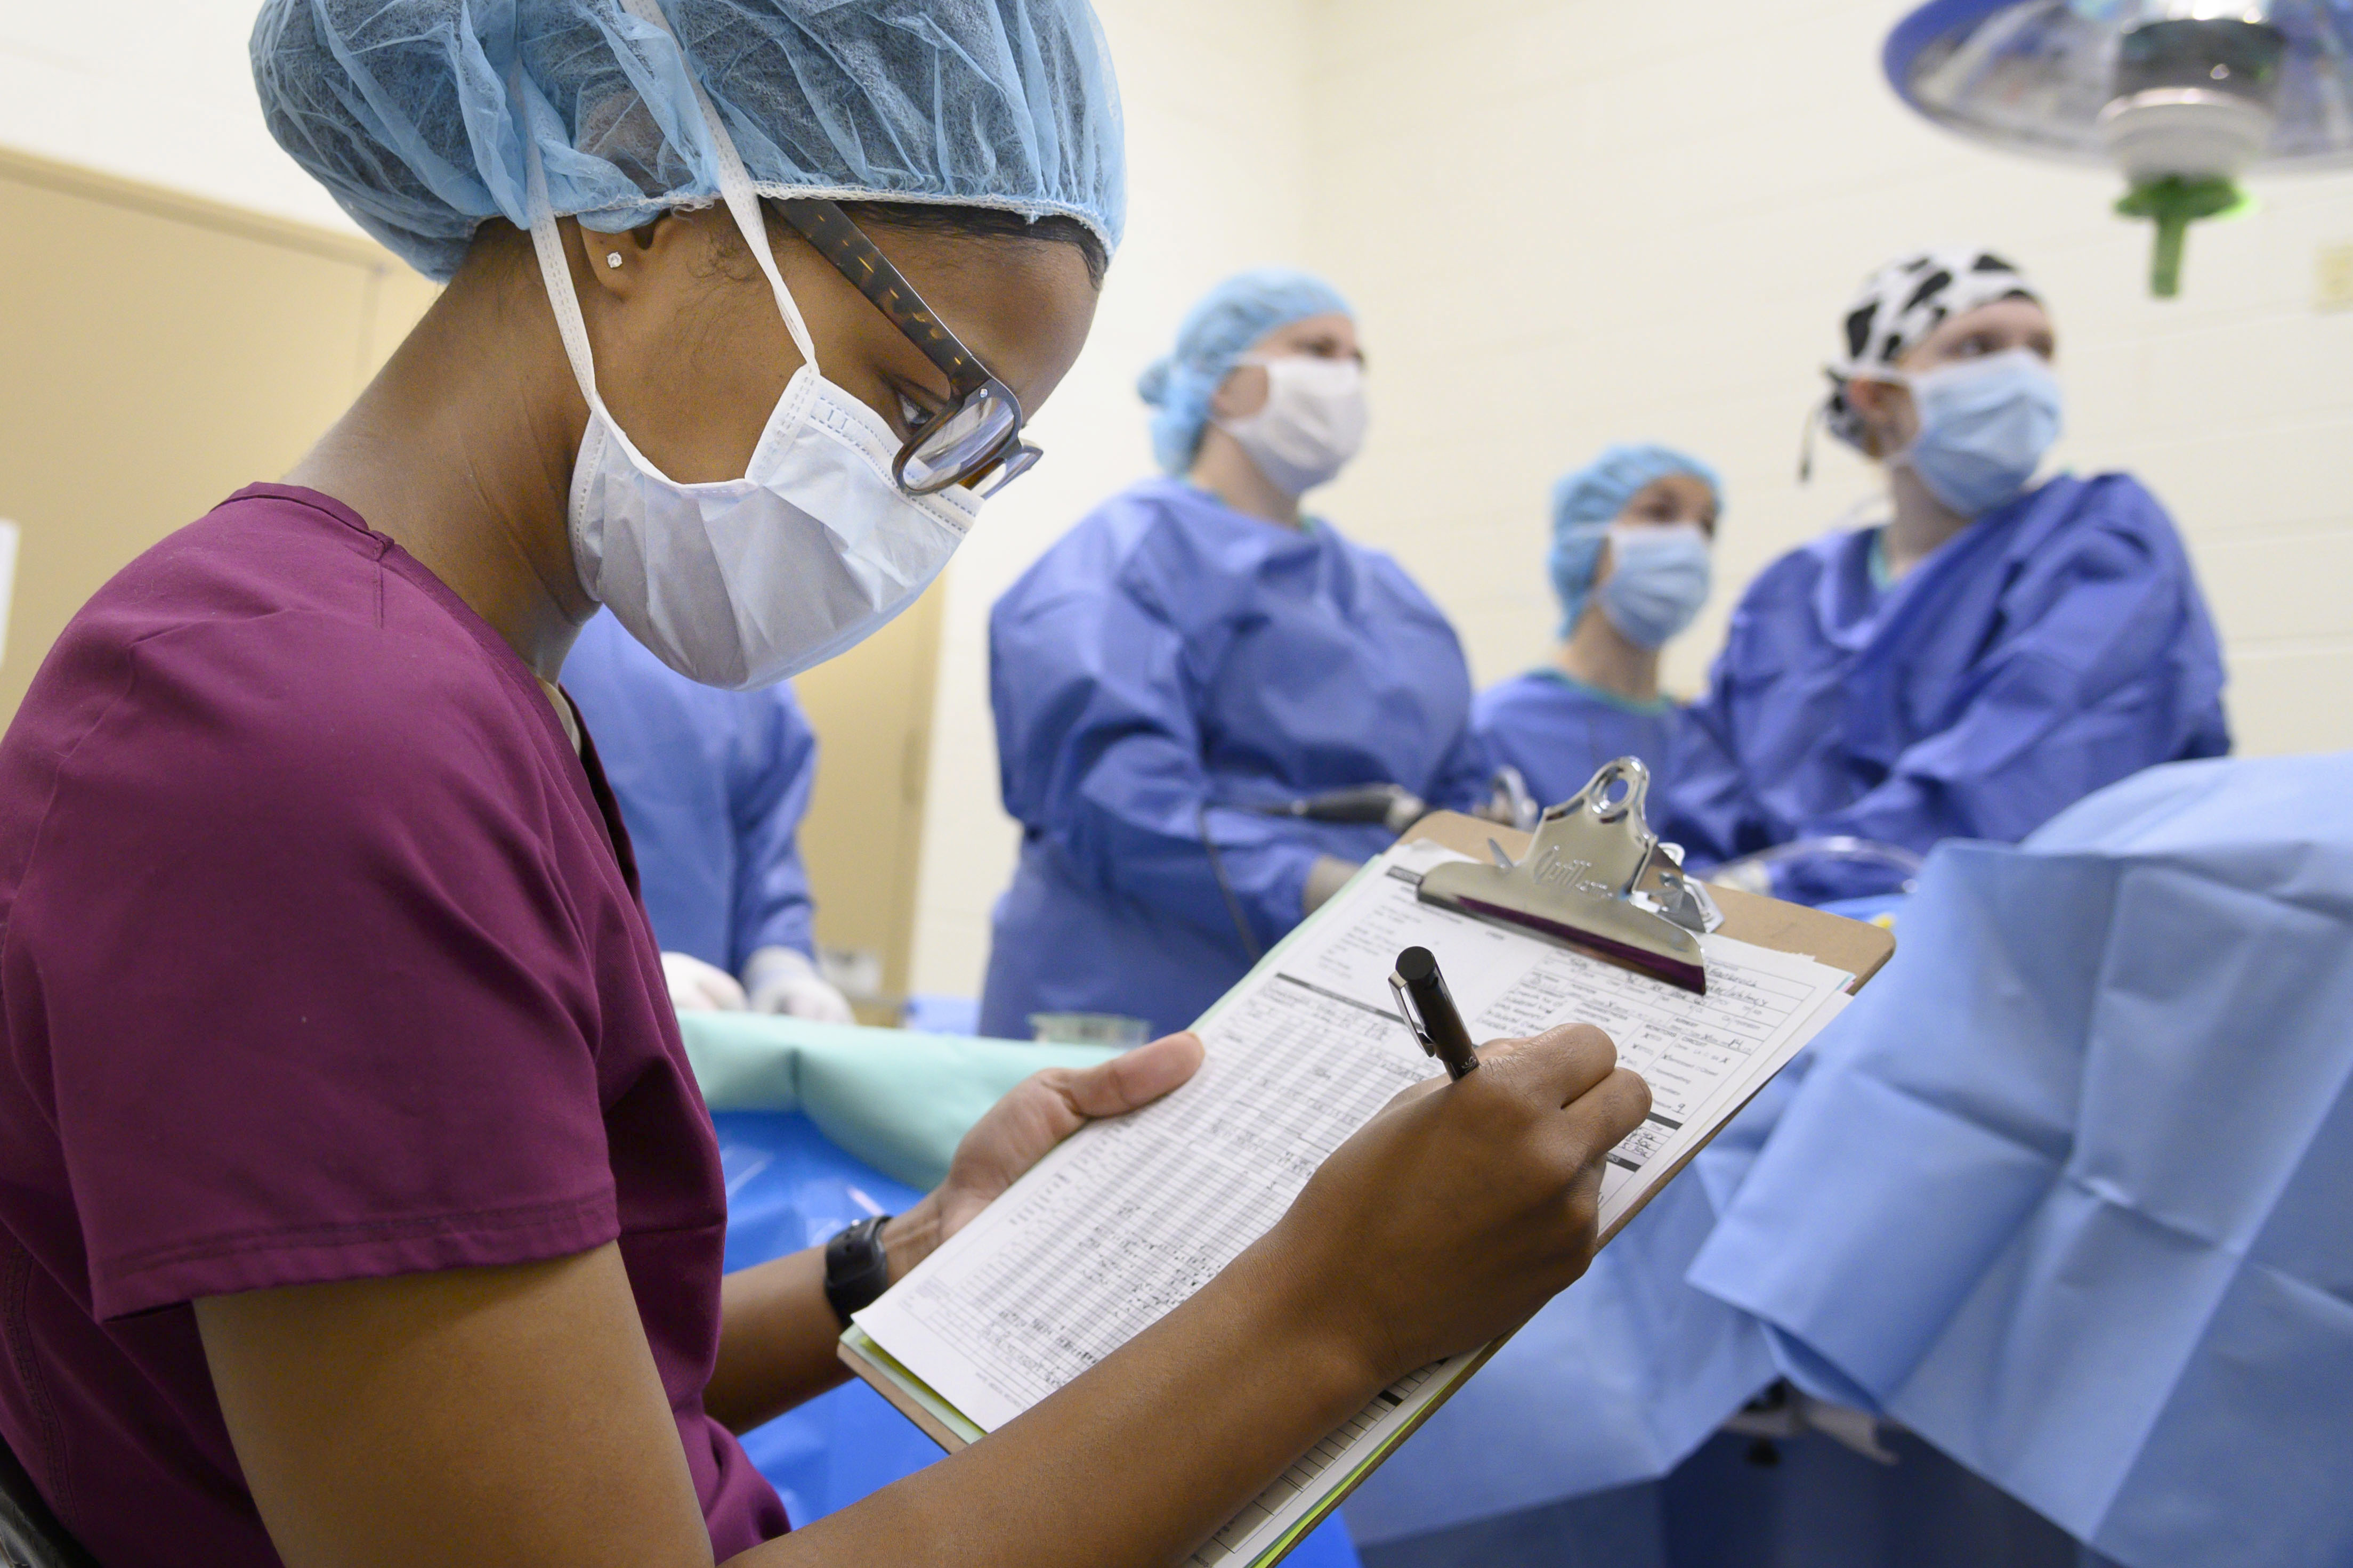 A technician takes notes during surgery